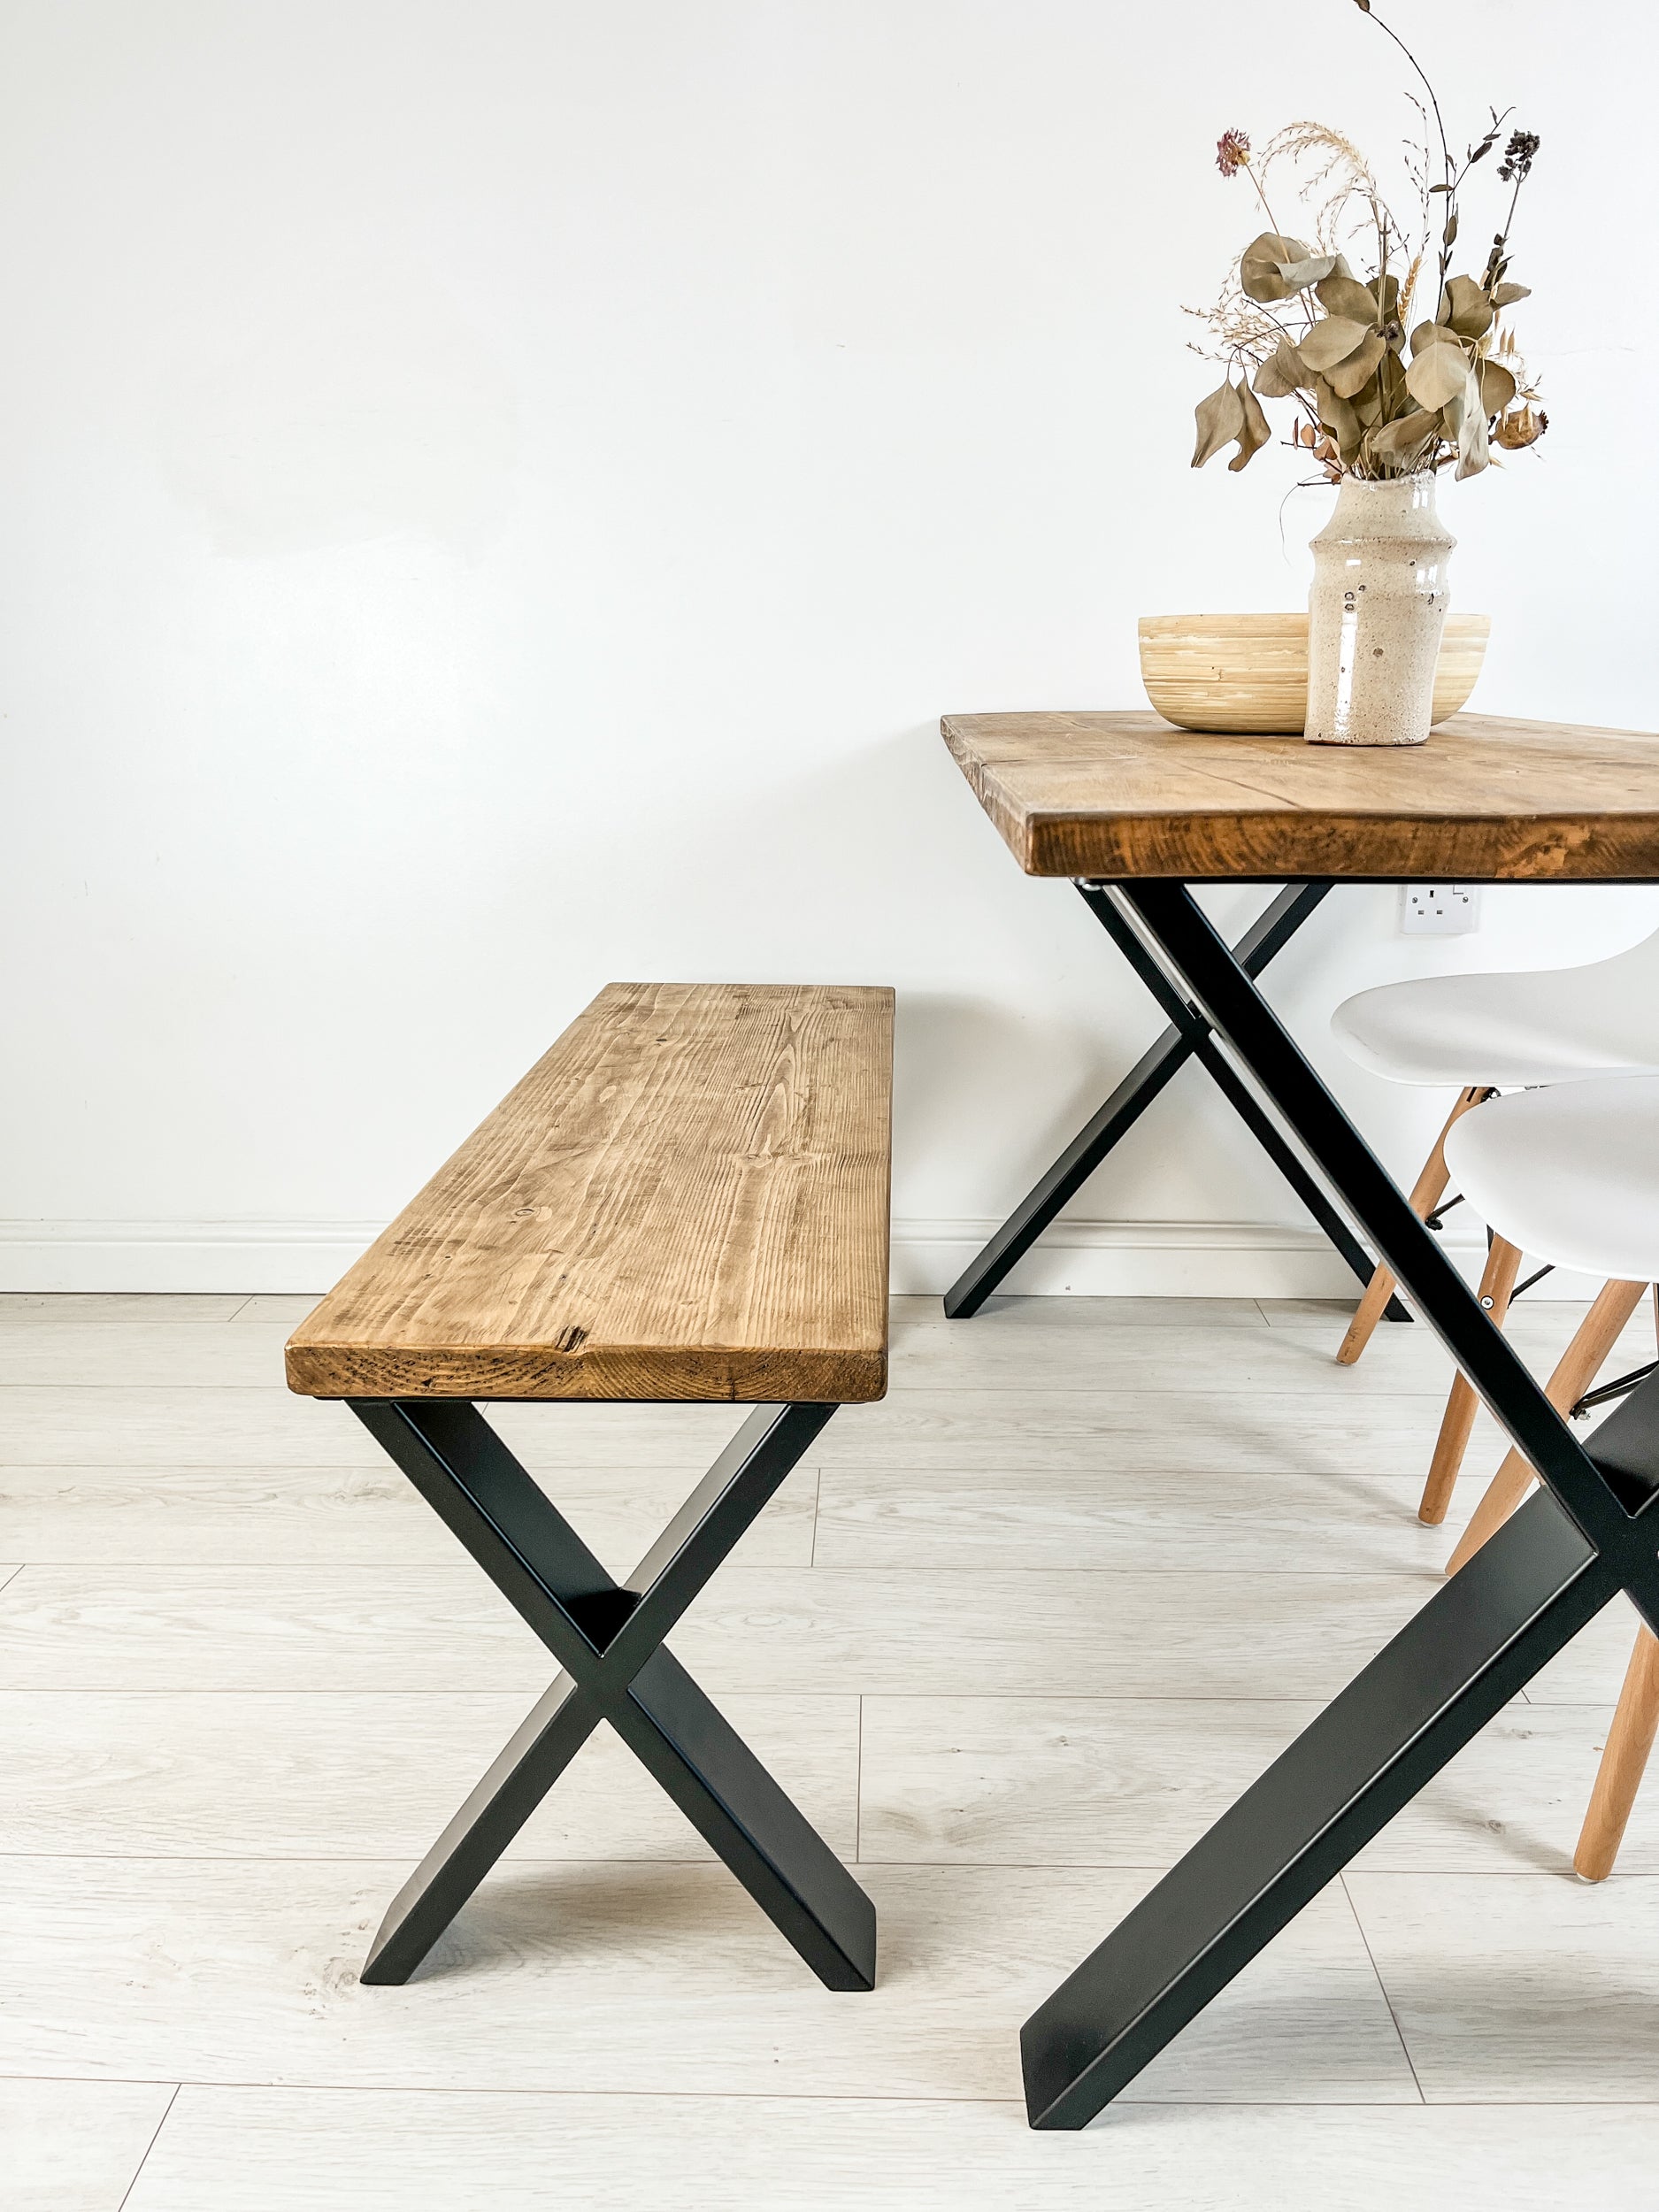 Rustic Wood Dining Table with Steel X-Frame Legs